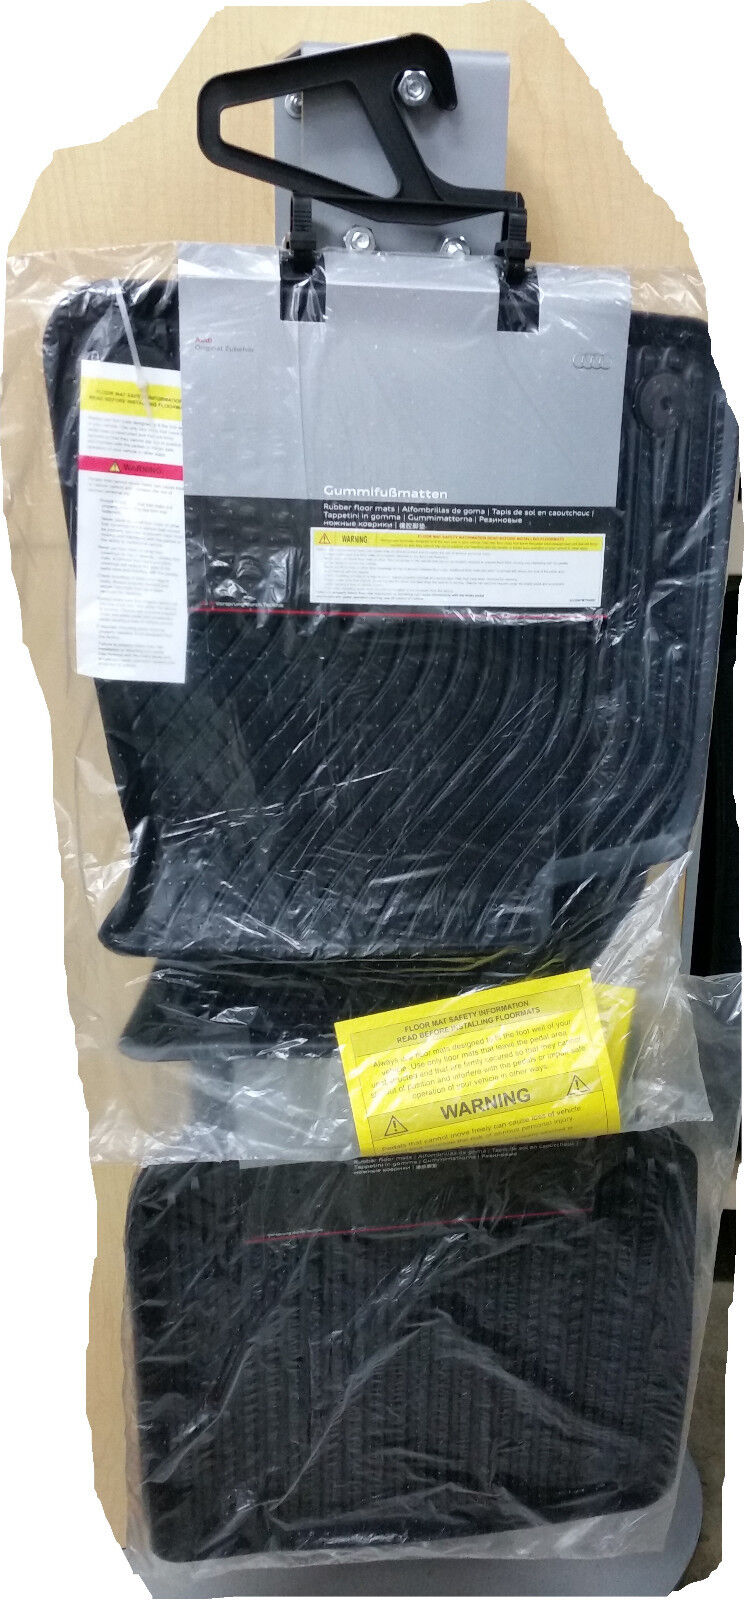 2011 TO 2016 Audi A8L (LWB) Genuine Factory Rubber Floor Mats - Set of 4